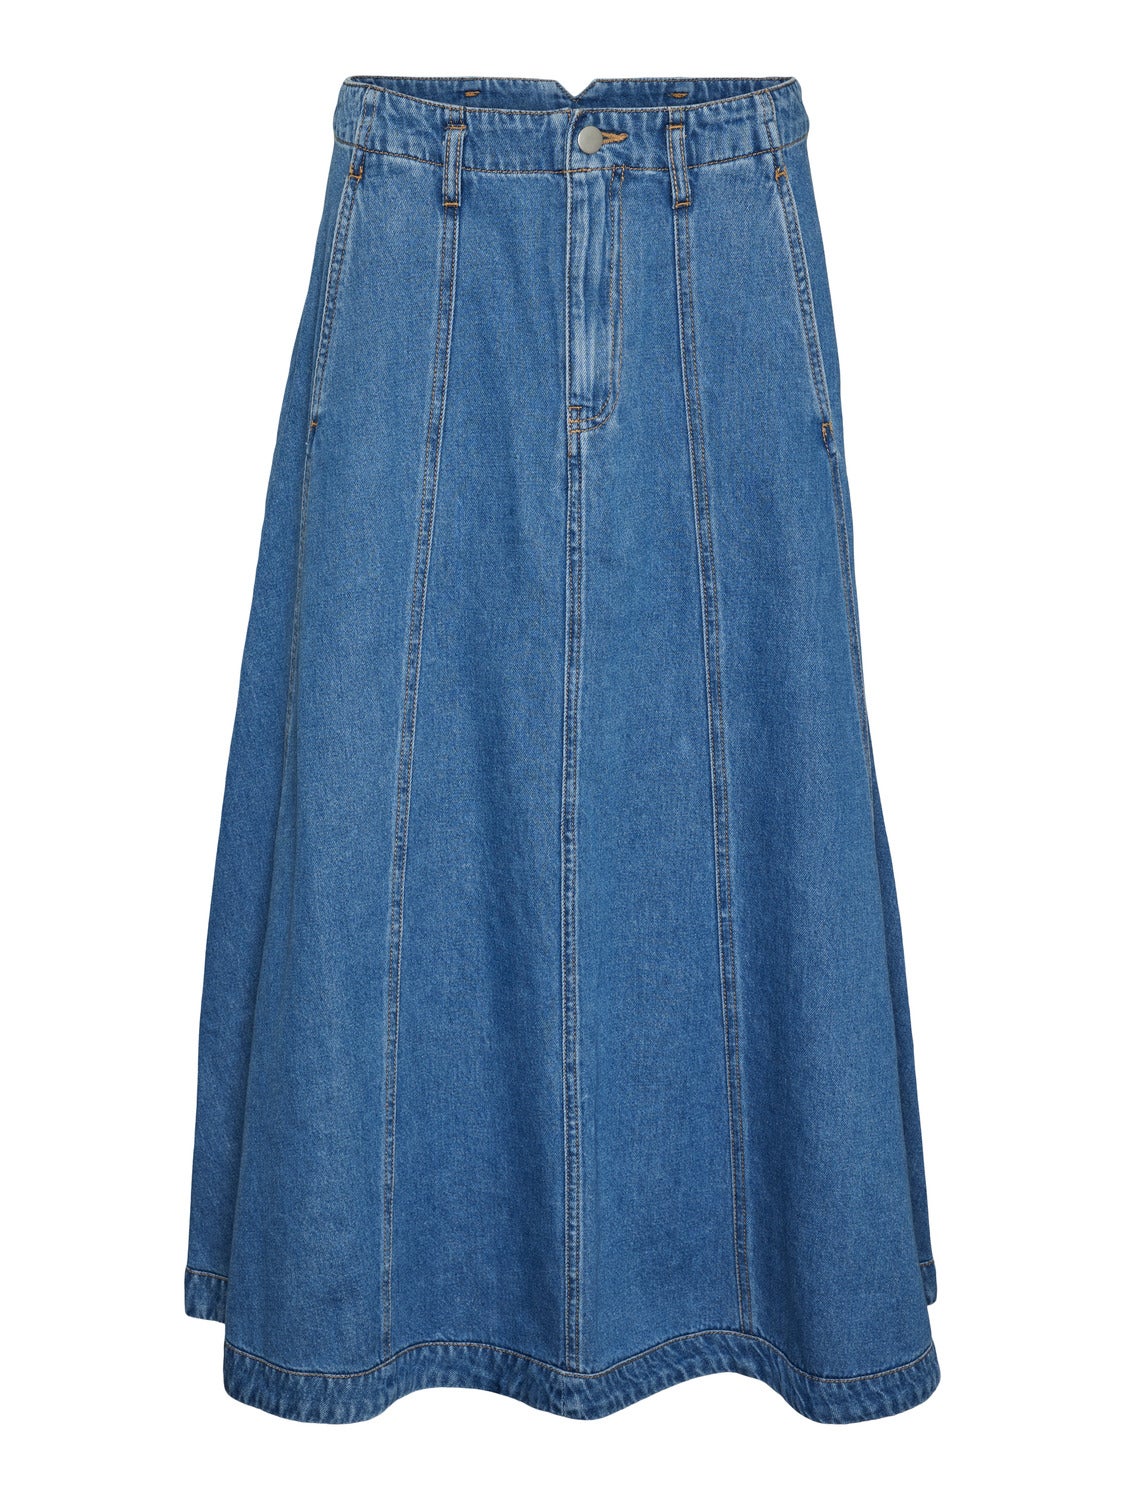 Korean Simple A Line High Waist Midi Long Jeans Skirt With Irregular  Splicing And Pocket Washed For Womens Casual Wear From Perkyytrade, $33.27  | DHgate.Com